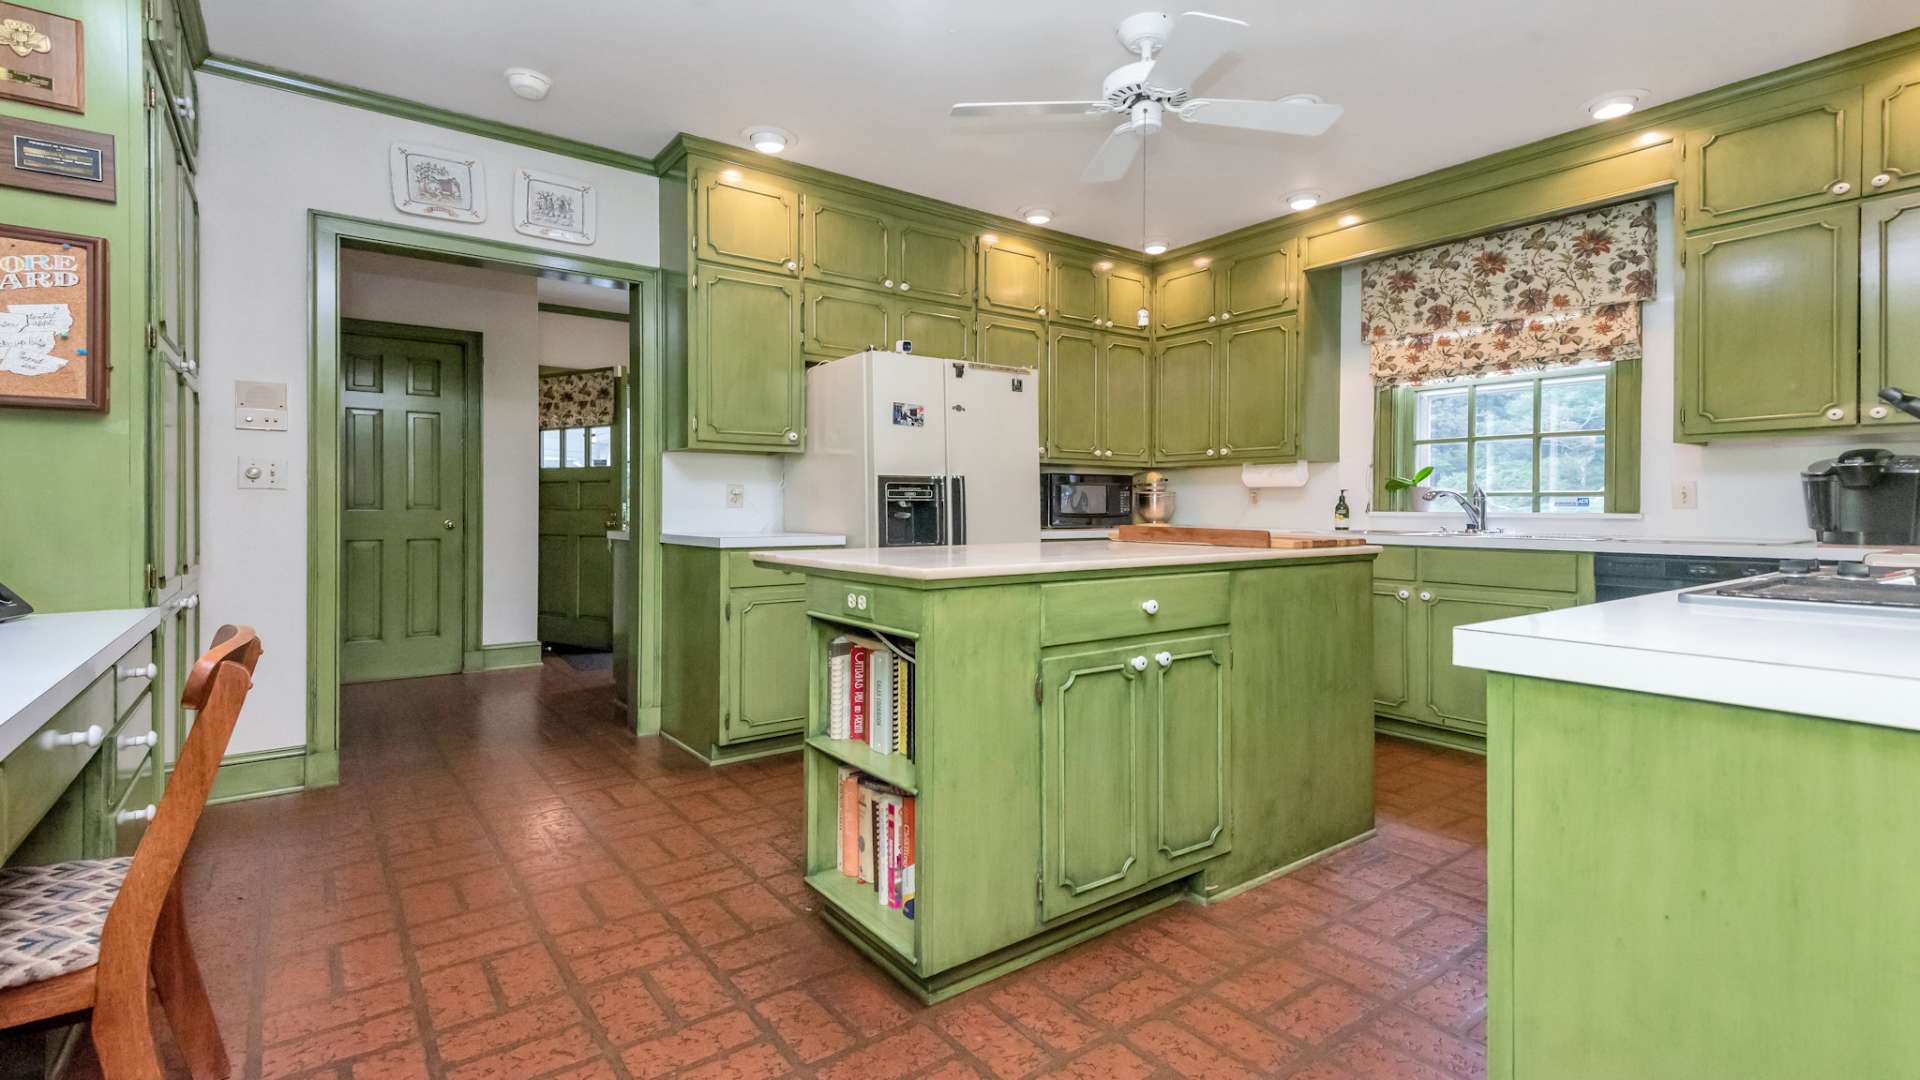 The kitchen continues the Virginia colonial influence and offers more than ample work and storage space.